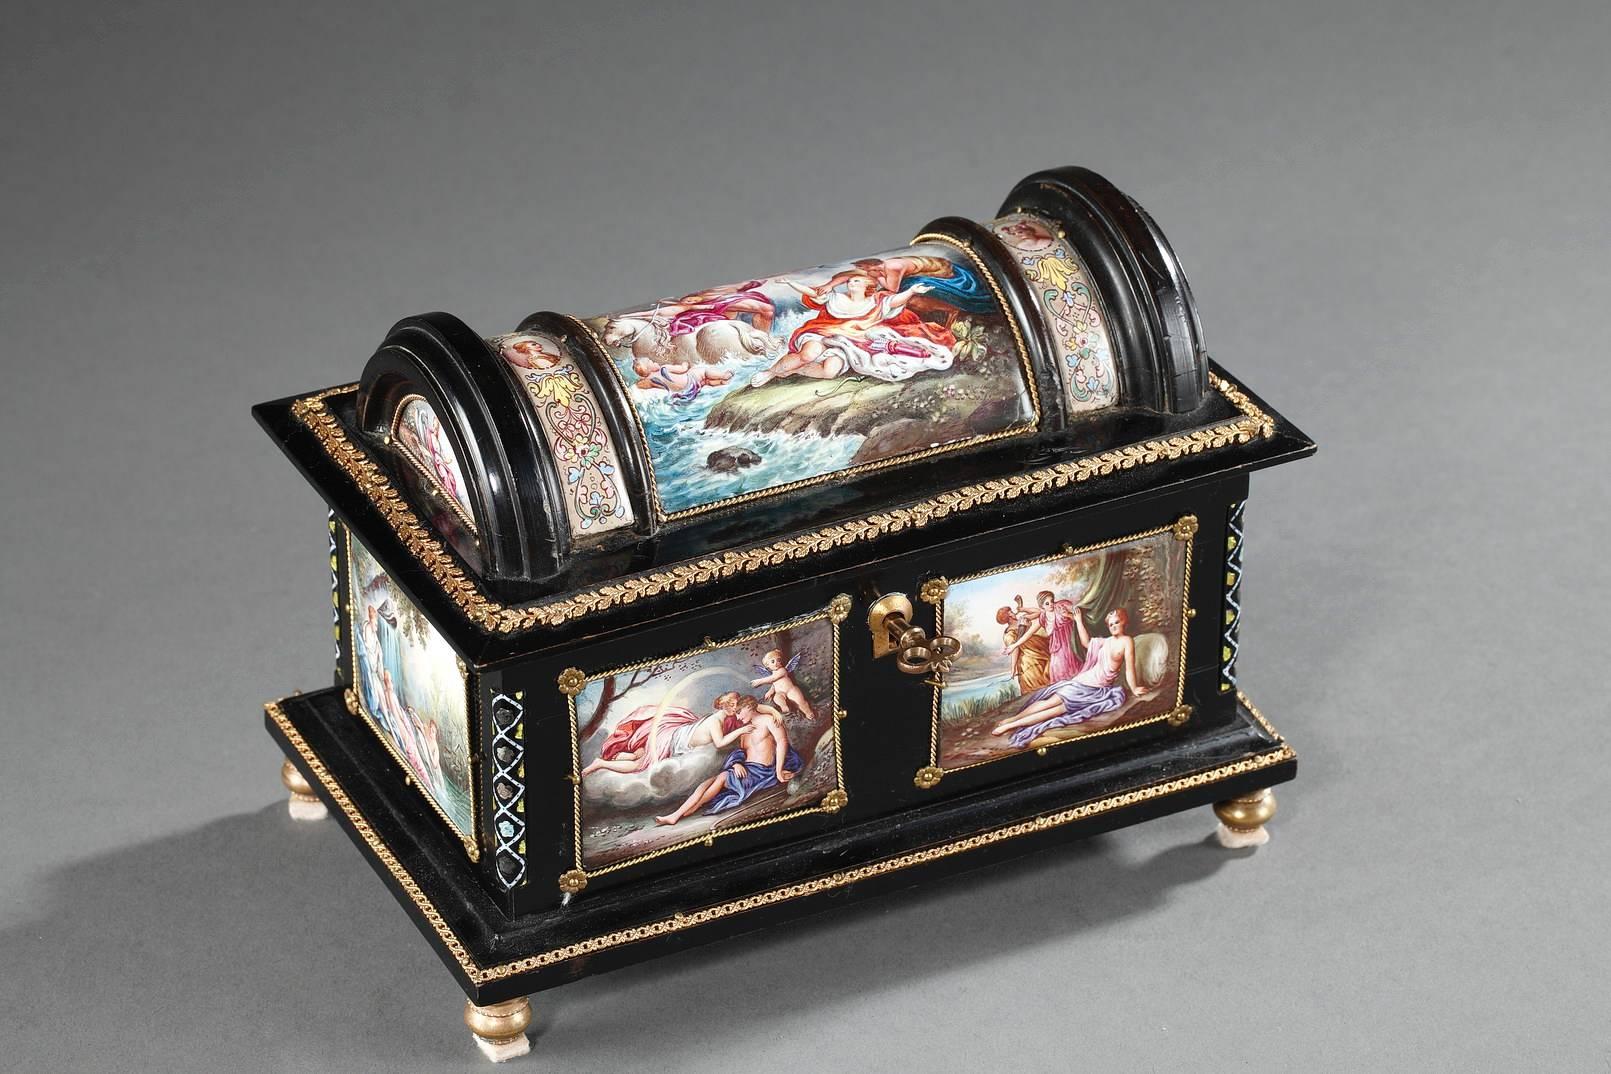 Small, rectangular, enamel coffer decorated with mythological scenes that are framed with spiraling lines of ormolu and attached with flowers at the corners. The Rape of Proserpina by the god Pluto adorns the lid. The front and back of the box are